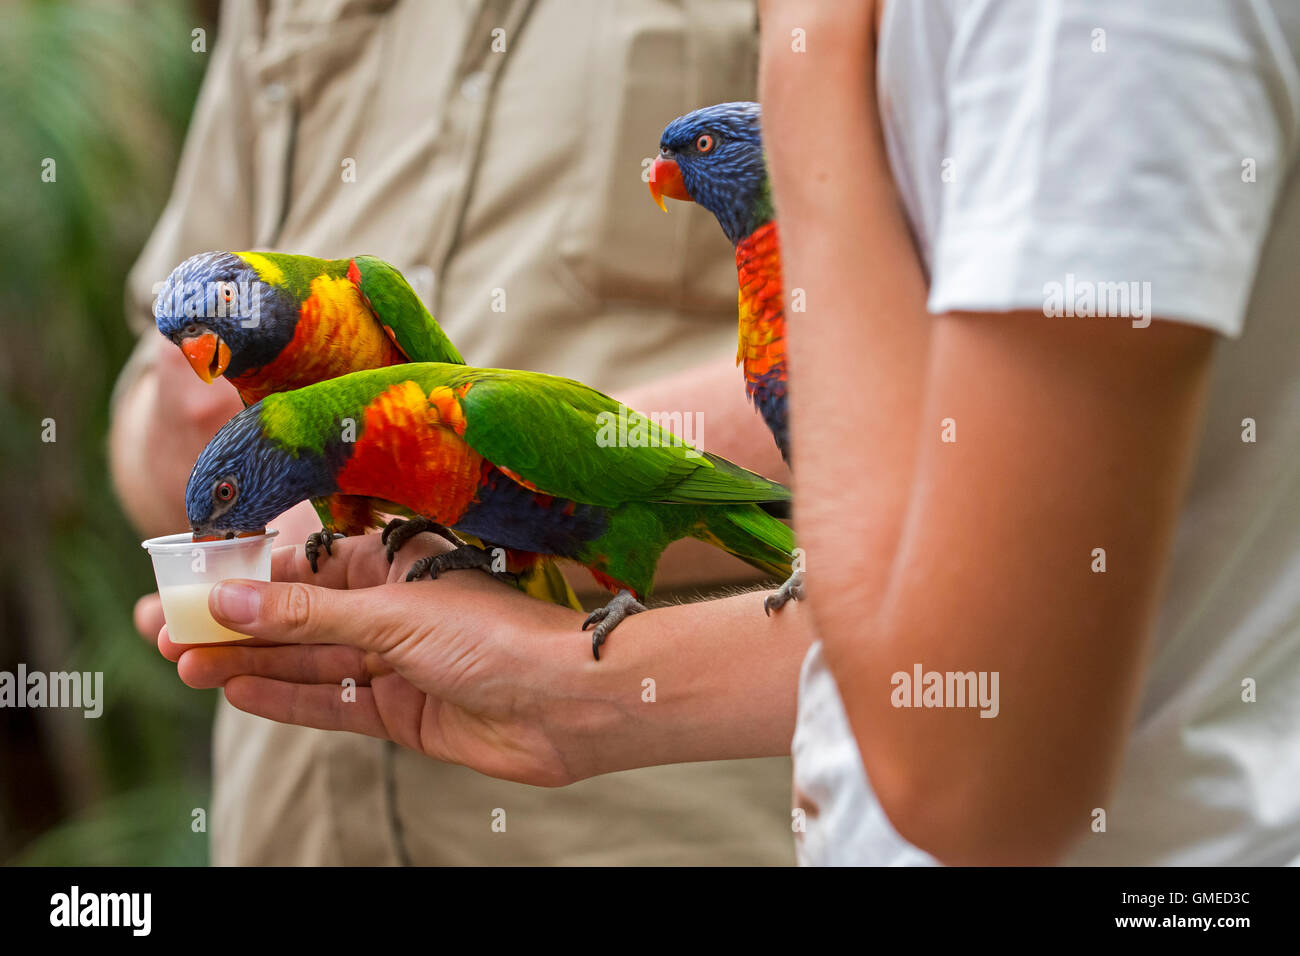 Visitor feeding tame rainbow lorikeets / Swainson's Lorikeet - colourful parrots native to Australia - by hand in zoo Stock Photo